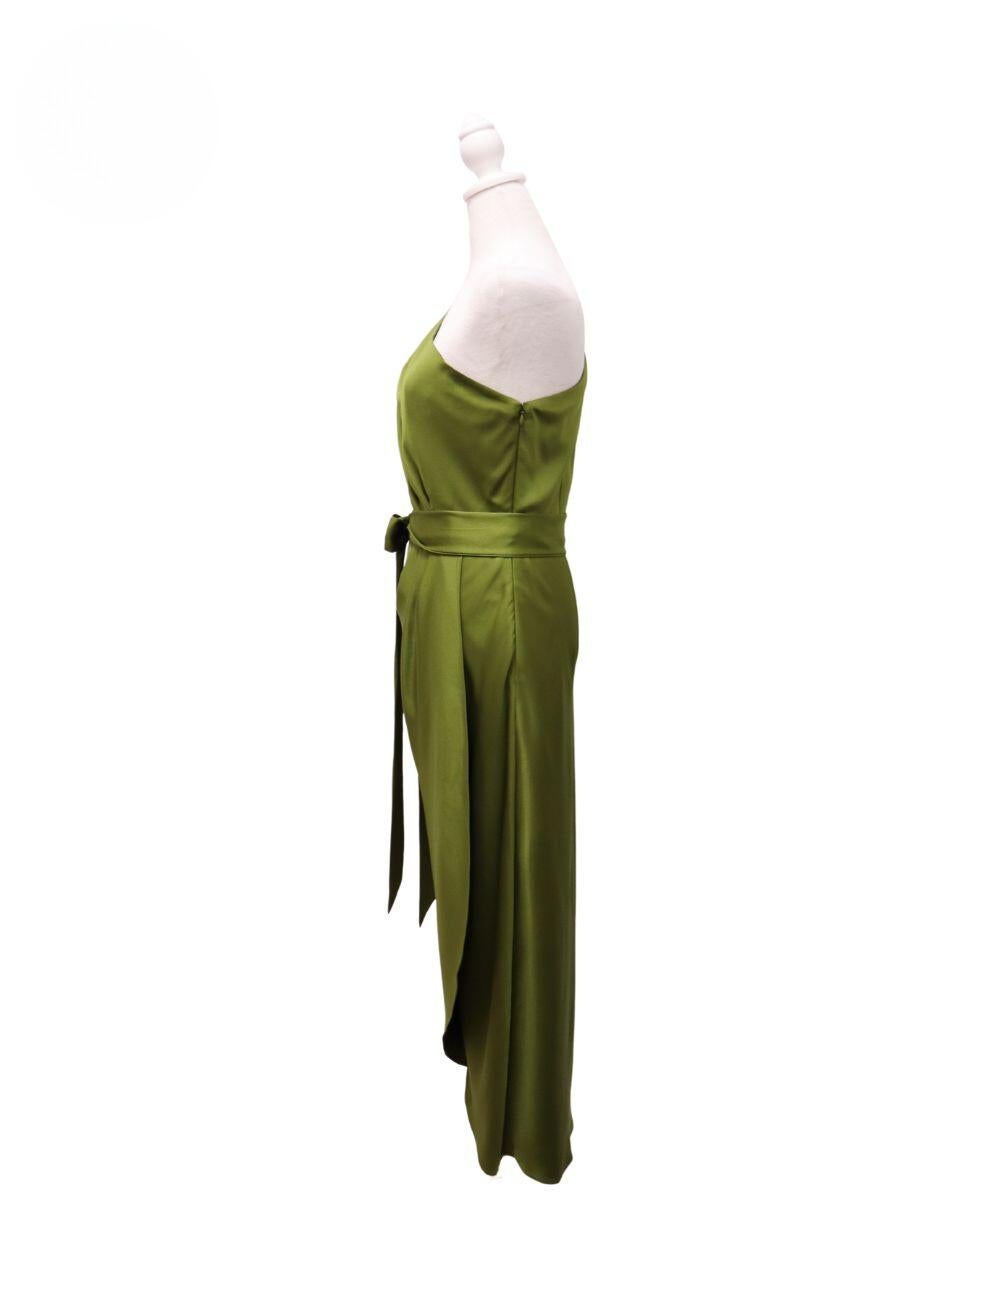 Ted Baker Gabie One Shoulder Drape Midi Dress, Features a One shoulder, Wrap style, Tie belt around the waist, and a Midi length.

Material: 100% Polyester
Size: EU 40 / 3
Bust: 94cm
Waist: 76cm
Hip: 103cm
Condition: New